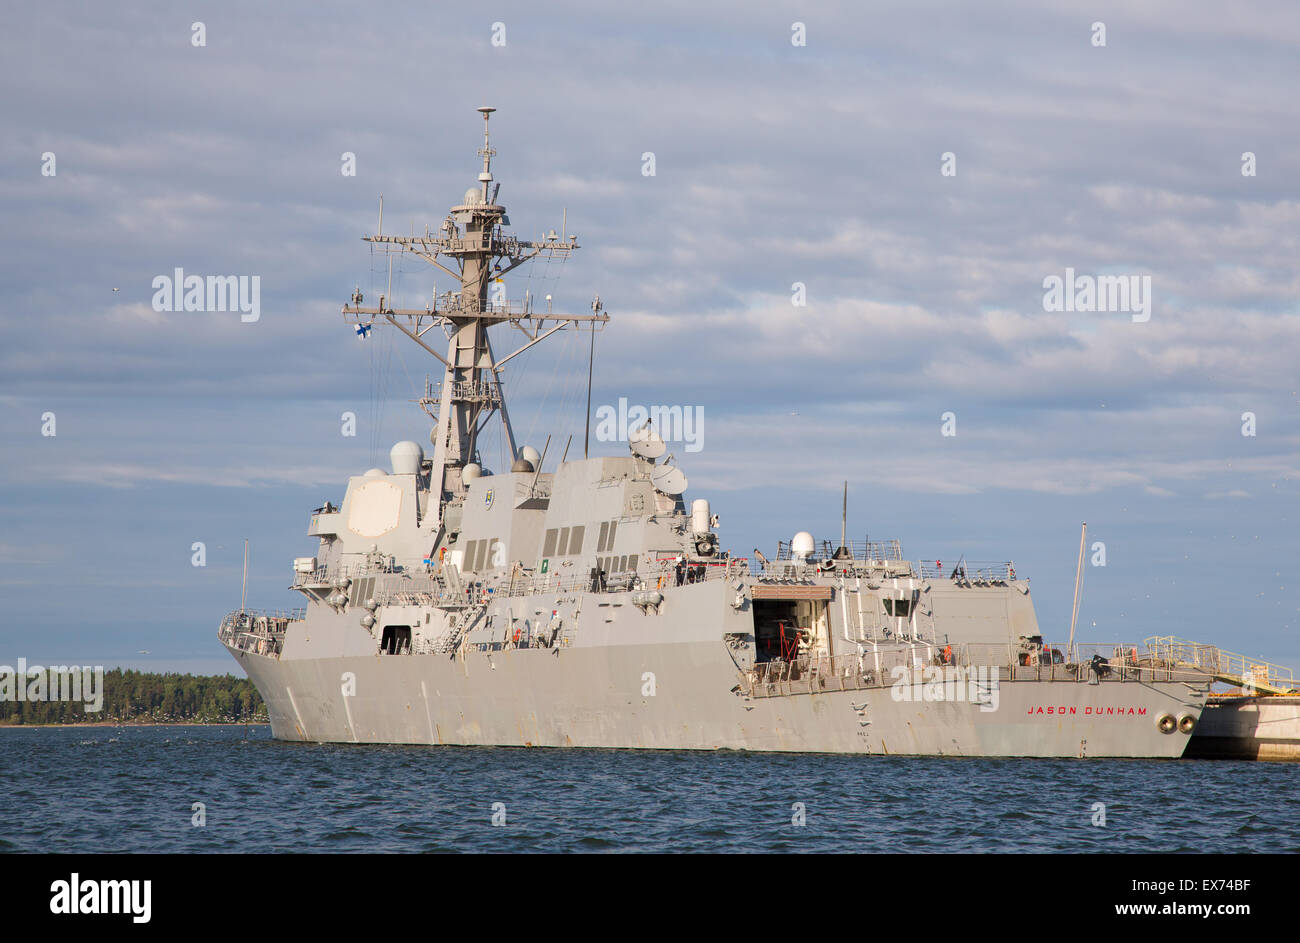 USS Jason Dunham, an Arleigh Burke-class destroyer in the United States Navy, moored at the West Harbor of Helsinki, Finland. Stock Photo